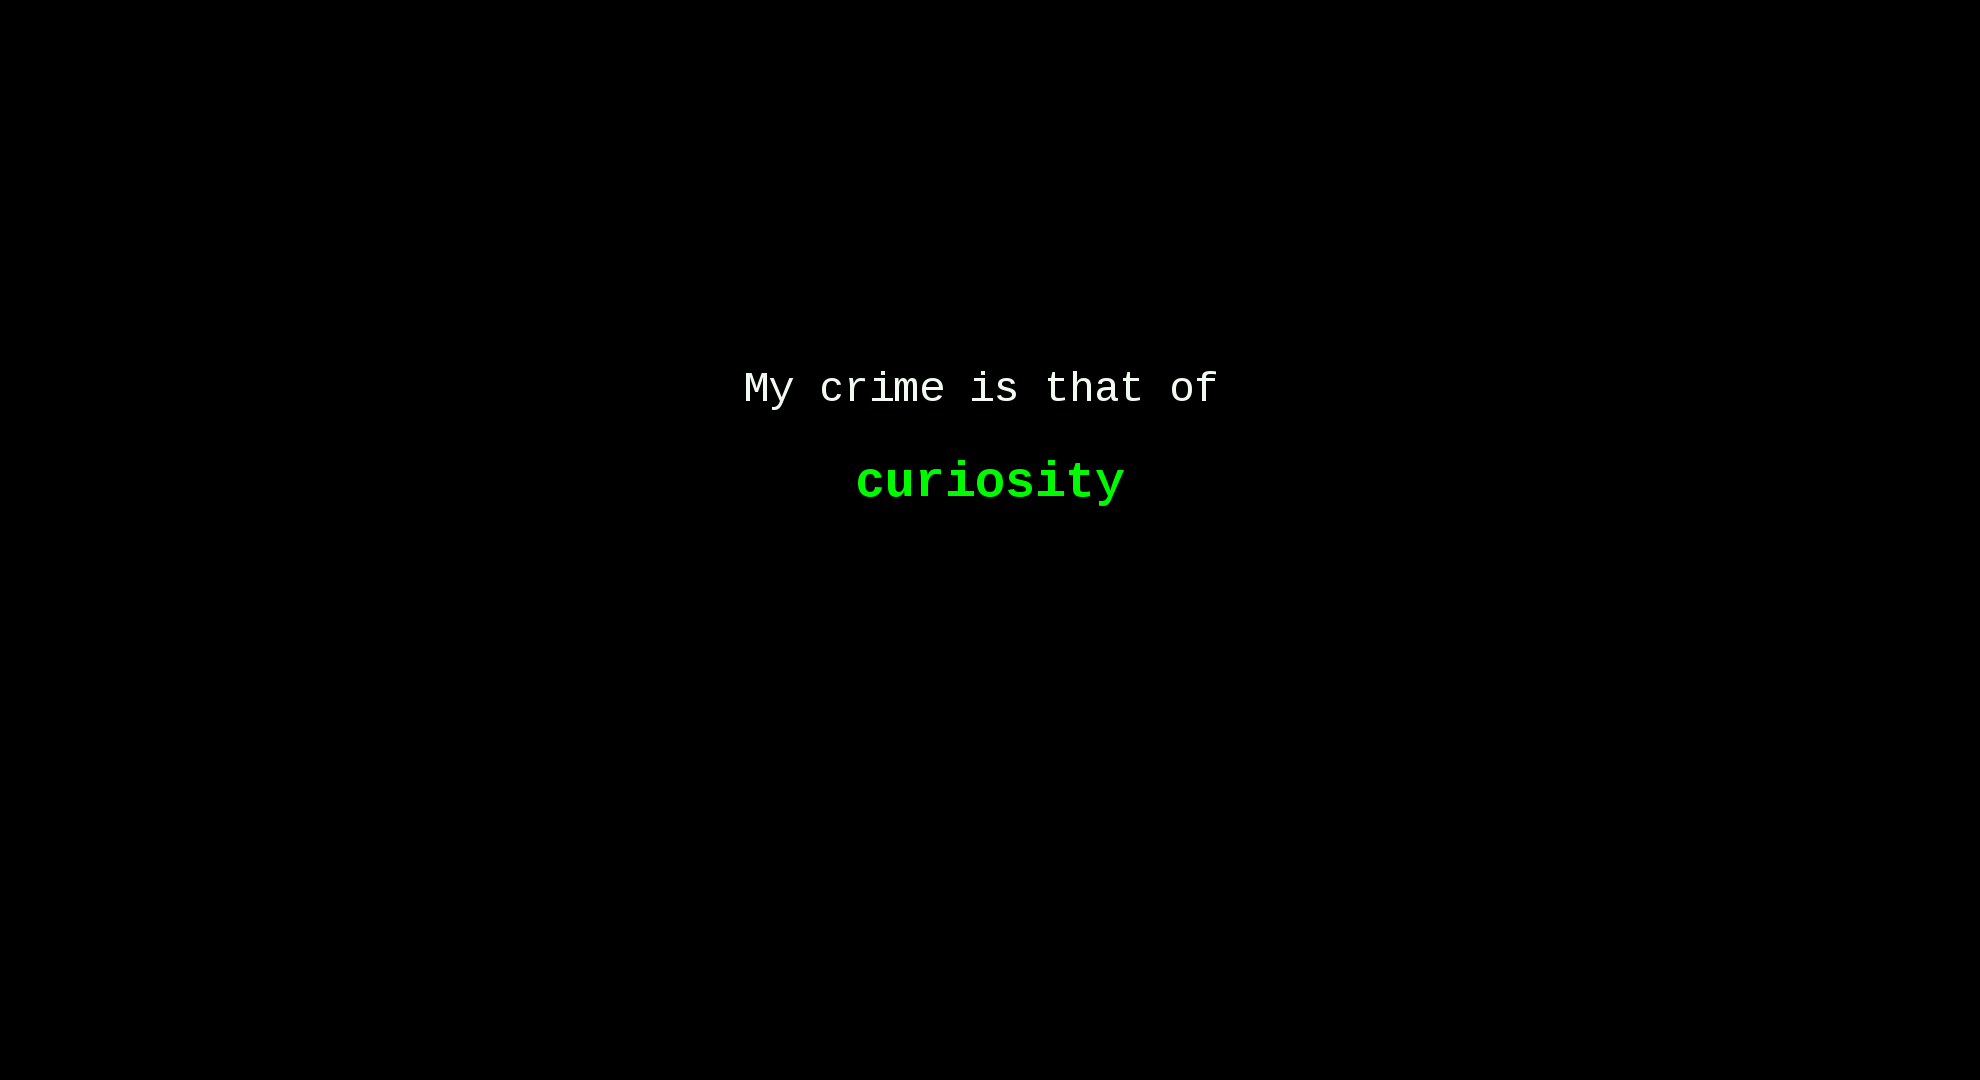 My crime is that of curiosity HD Wallpaper. Background Image